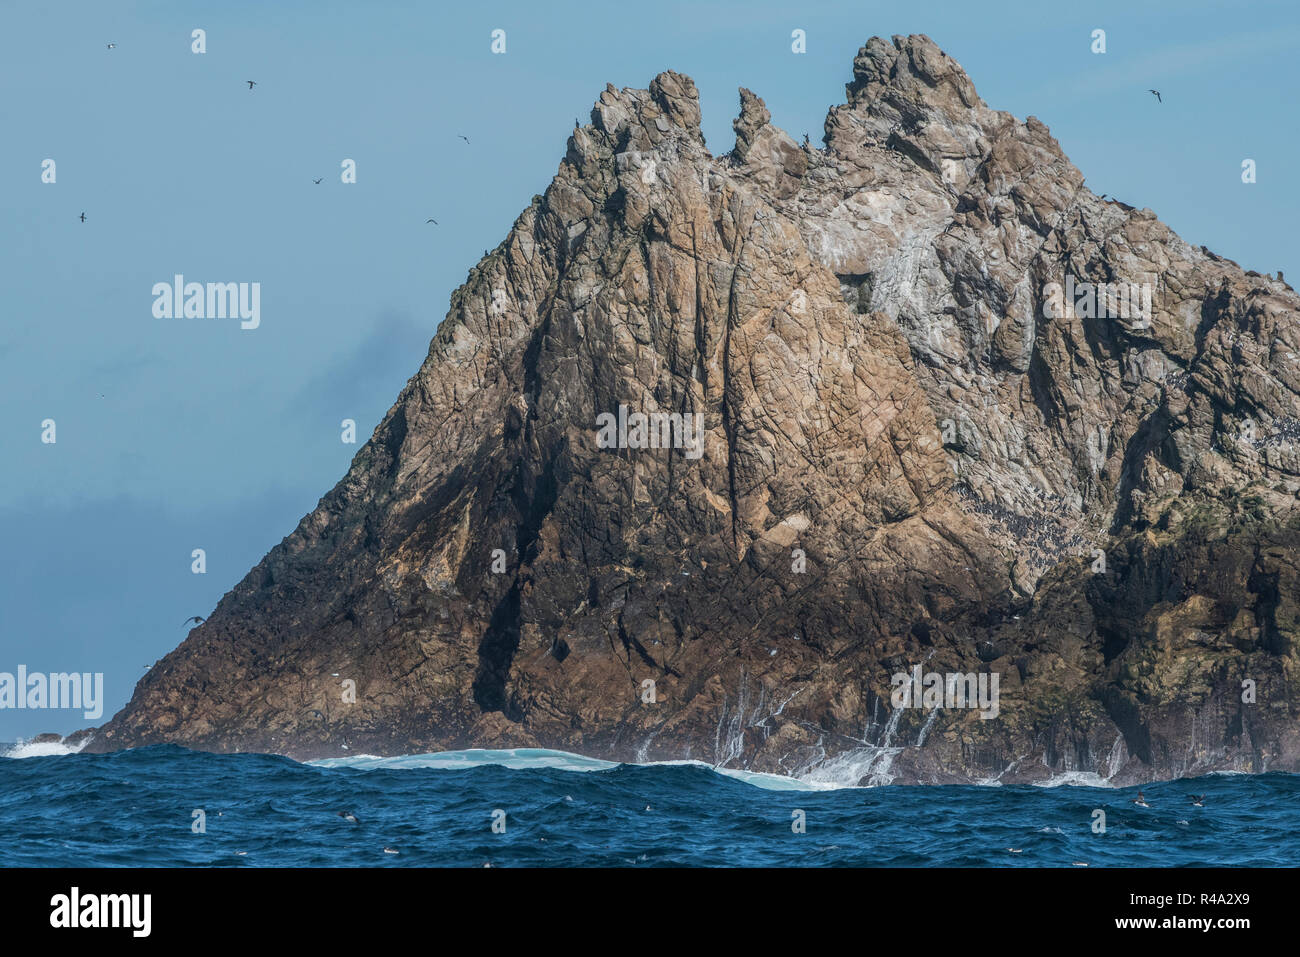 A rocky island juts out of the Pacific ocean, this is part of the Farallon islands, California. Stock Photo